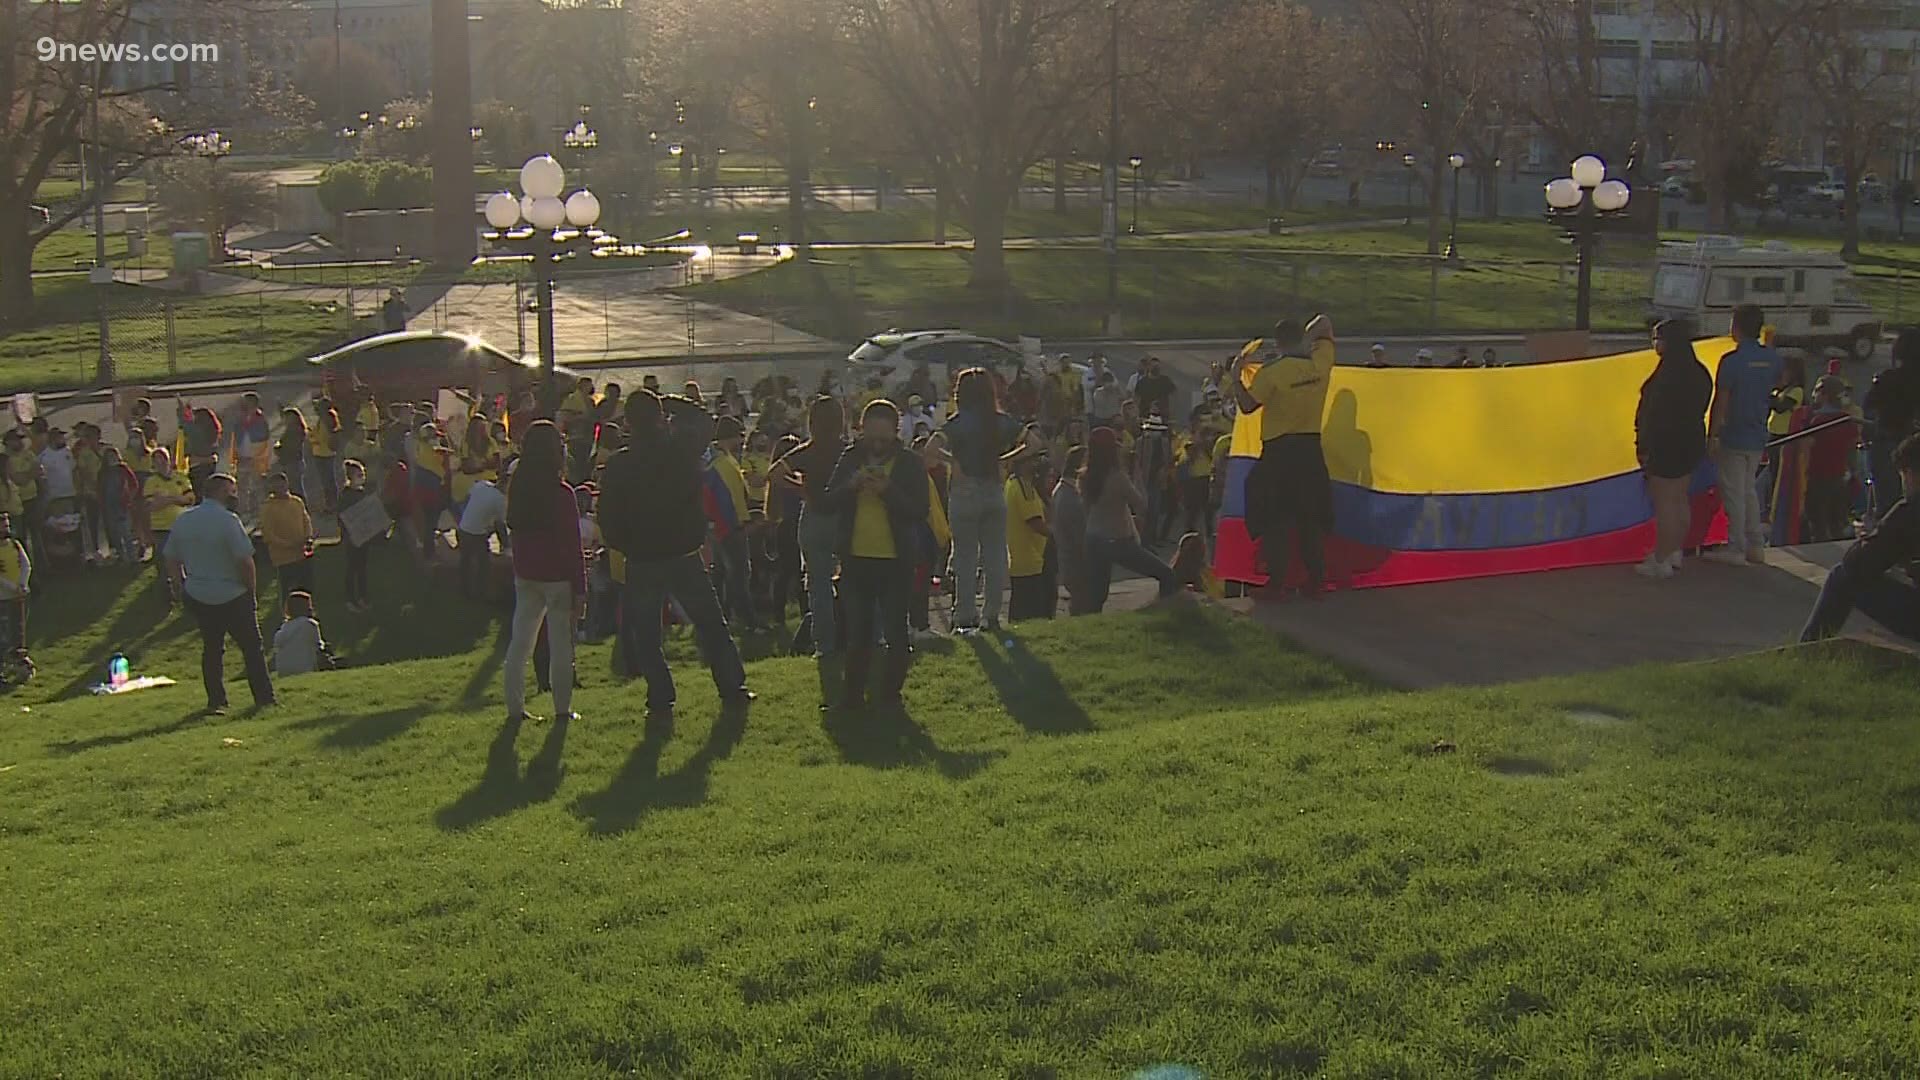 Members of the Colombian community in Colorado gathered at the state Capitol Wednesday in support of protests against the Colombian government in Colombia.